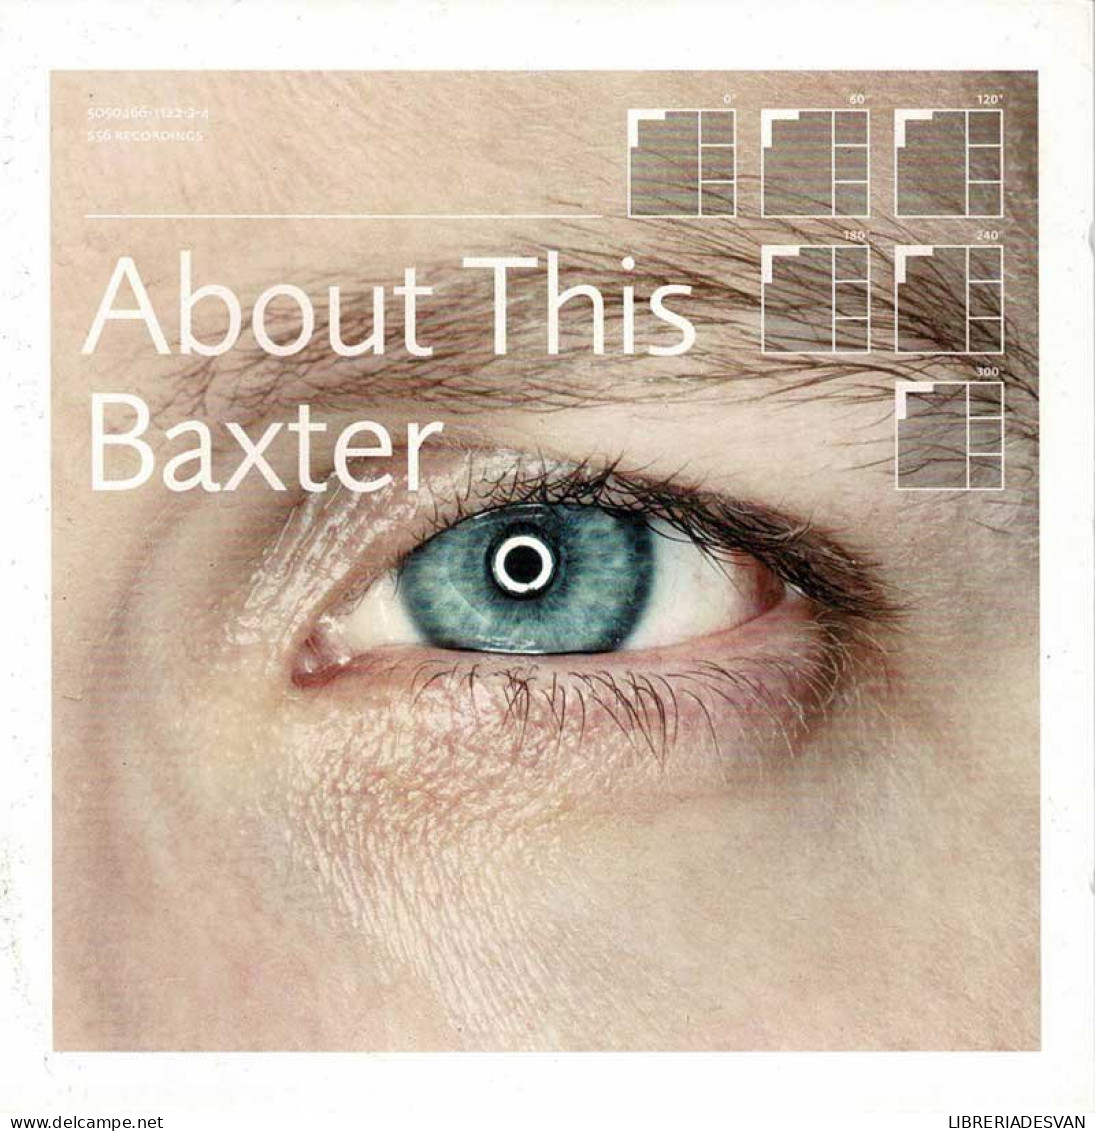 Baxter - About This. CD - Dance, Techno En House